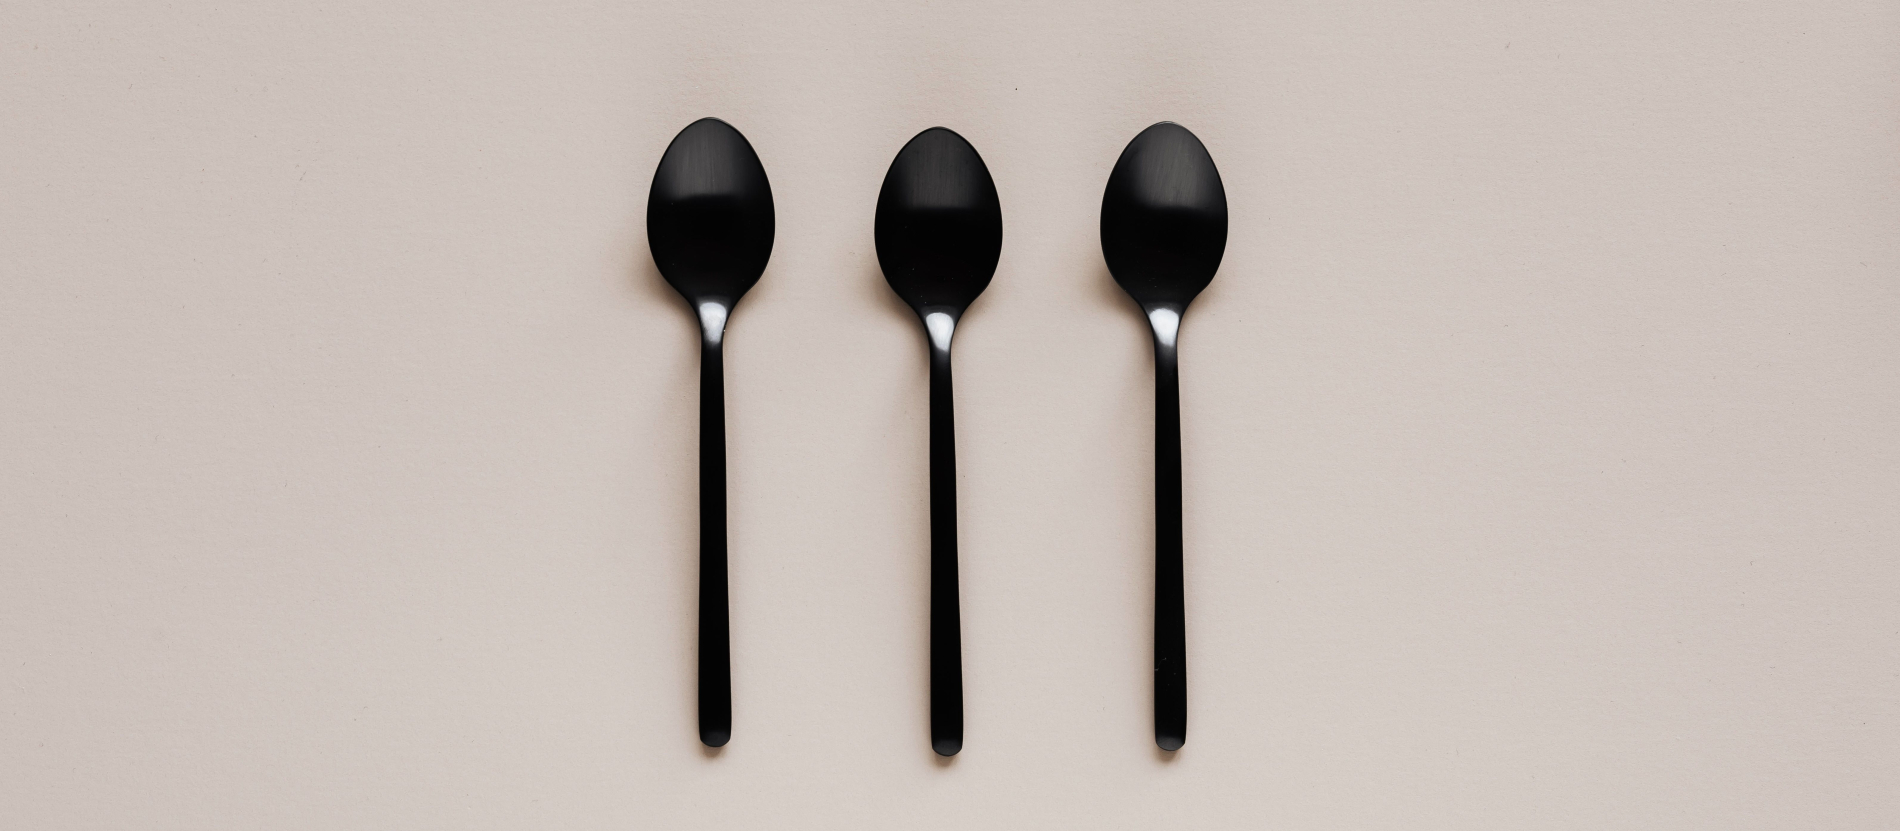 Three black, plastic spoons lined up side-by-side on a beige background.